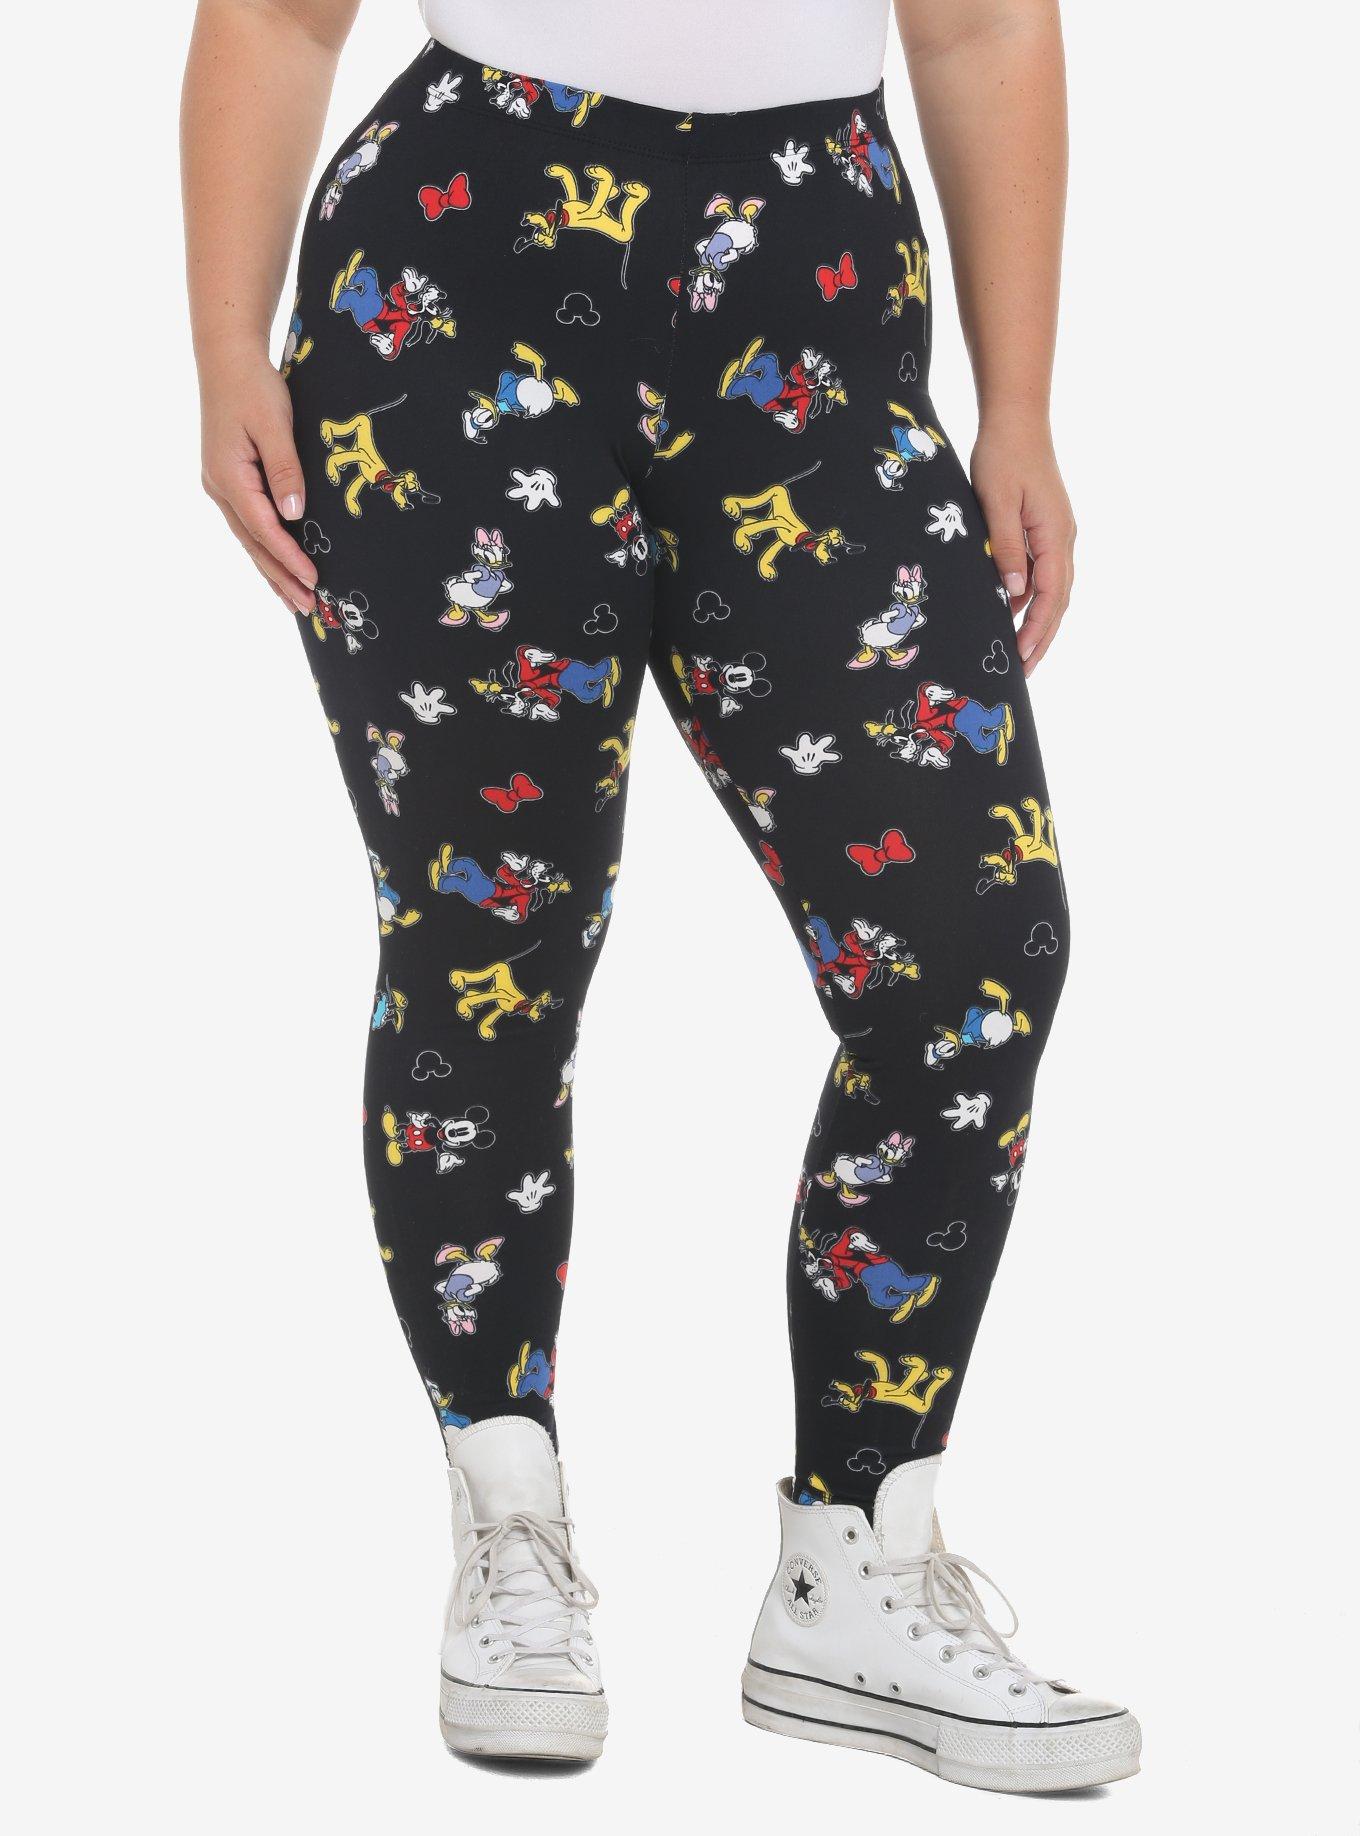 Check out all these Disney Leggings